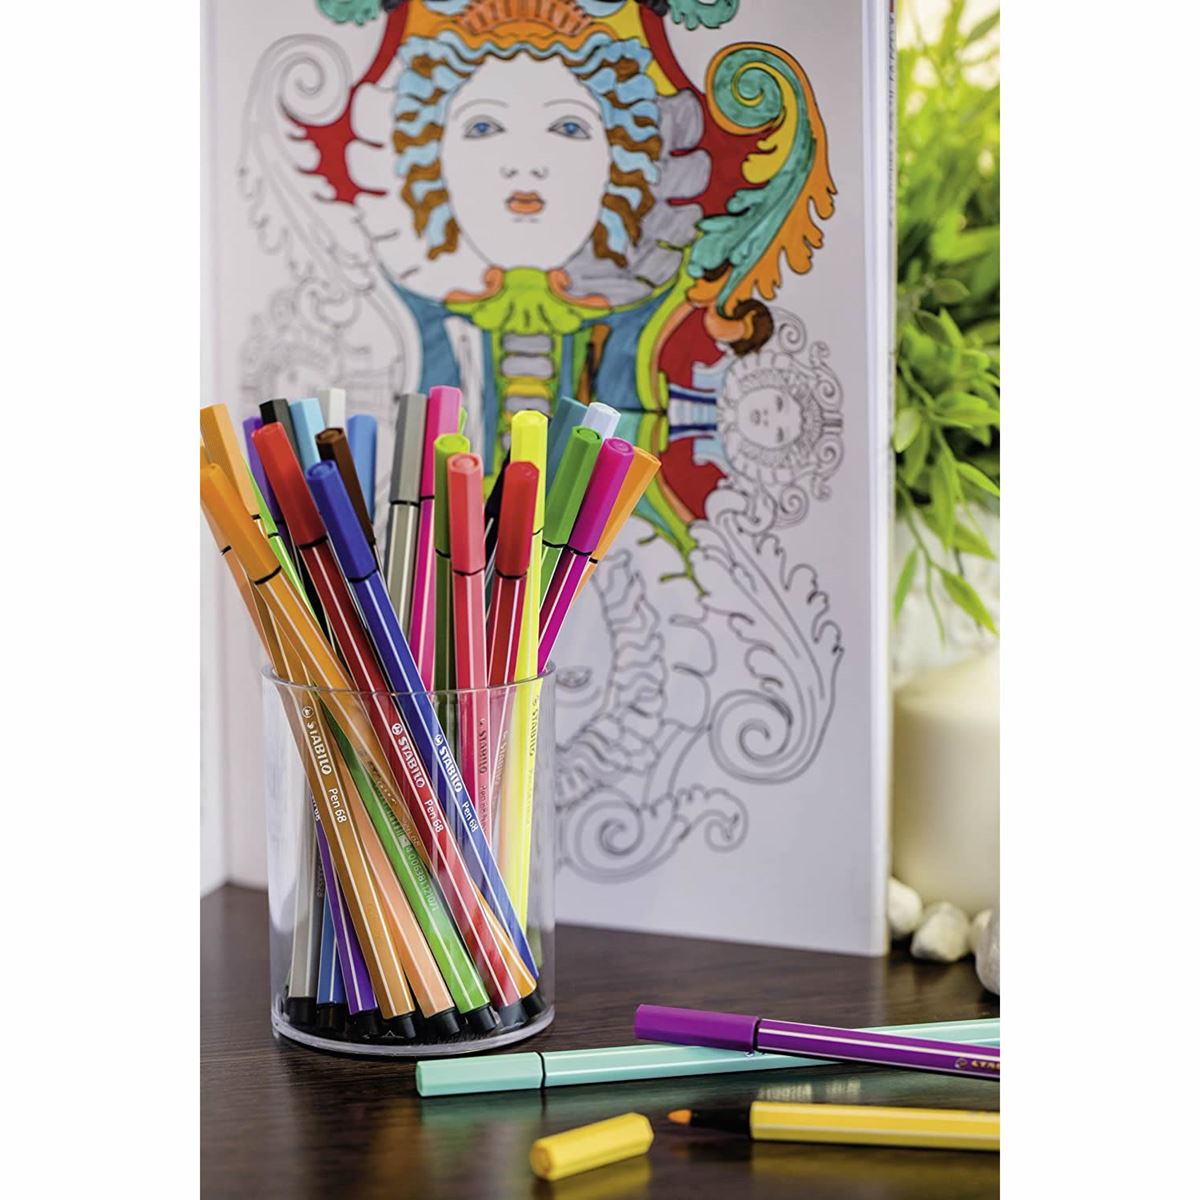 Premium Fibre-tip Pen STABILO Pen 68 Coloured Pens Various Pack Sizes and  Colours School Revision Stationery Colouring Art Stationery 